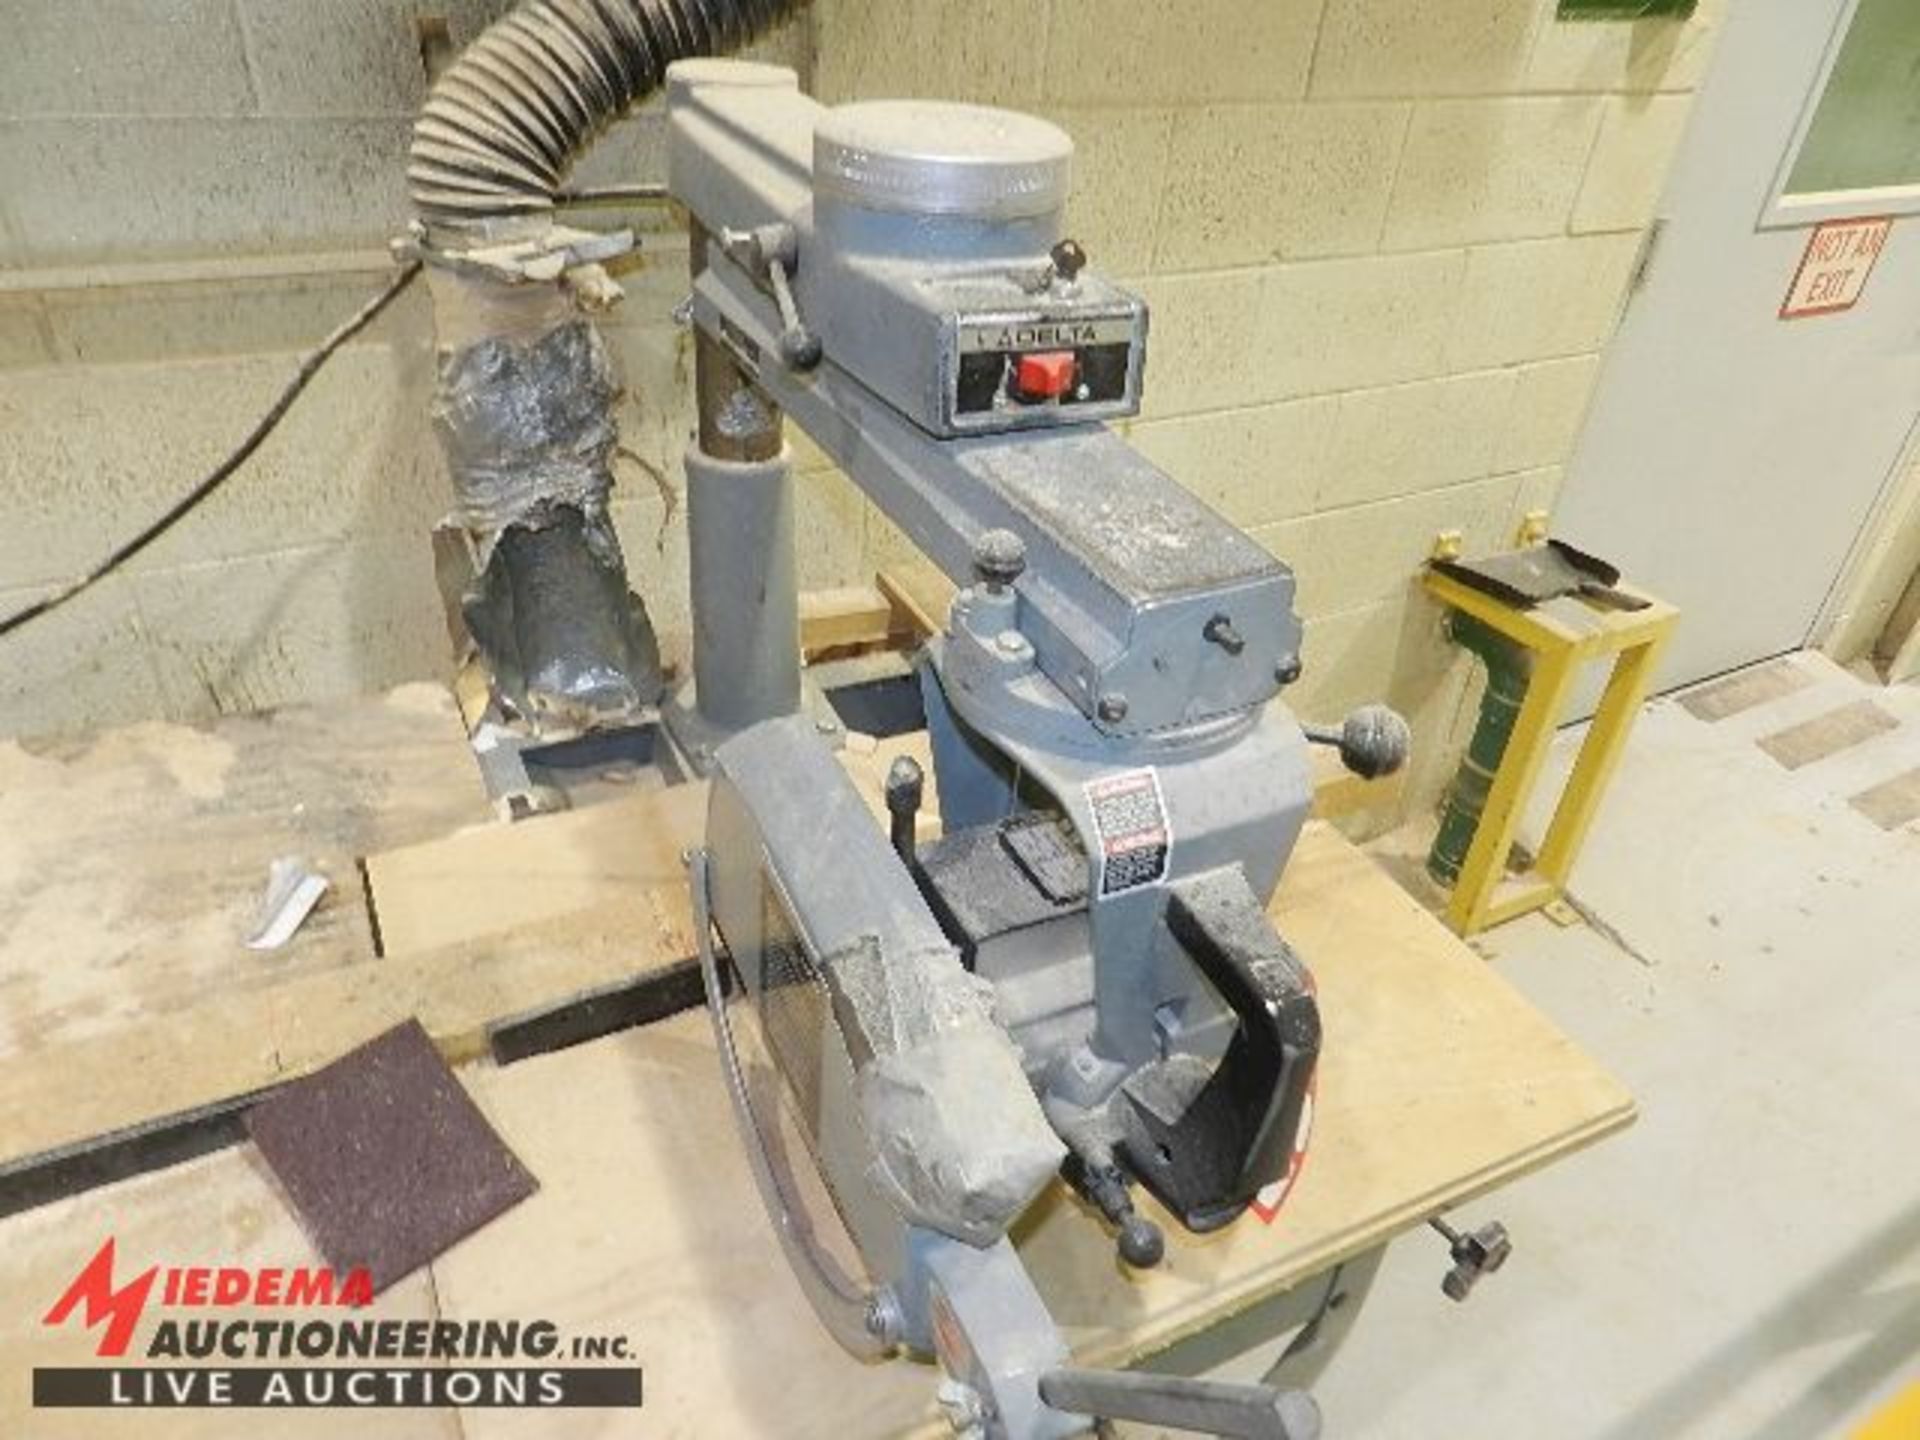 DELTA 438-02-314-2067 10" RADIAL ARM SAW, 2 HP, 230 VOLT, SINGLE PHASE, INCLUDES STAND AND WOOD - Image 3 of 4